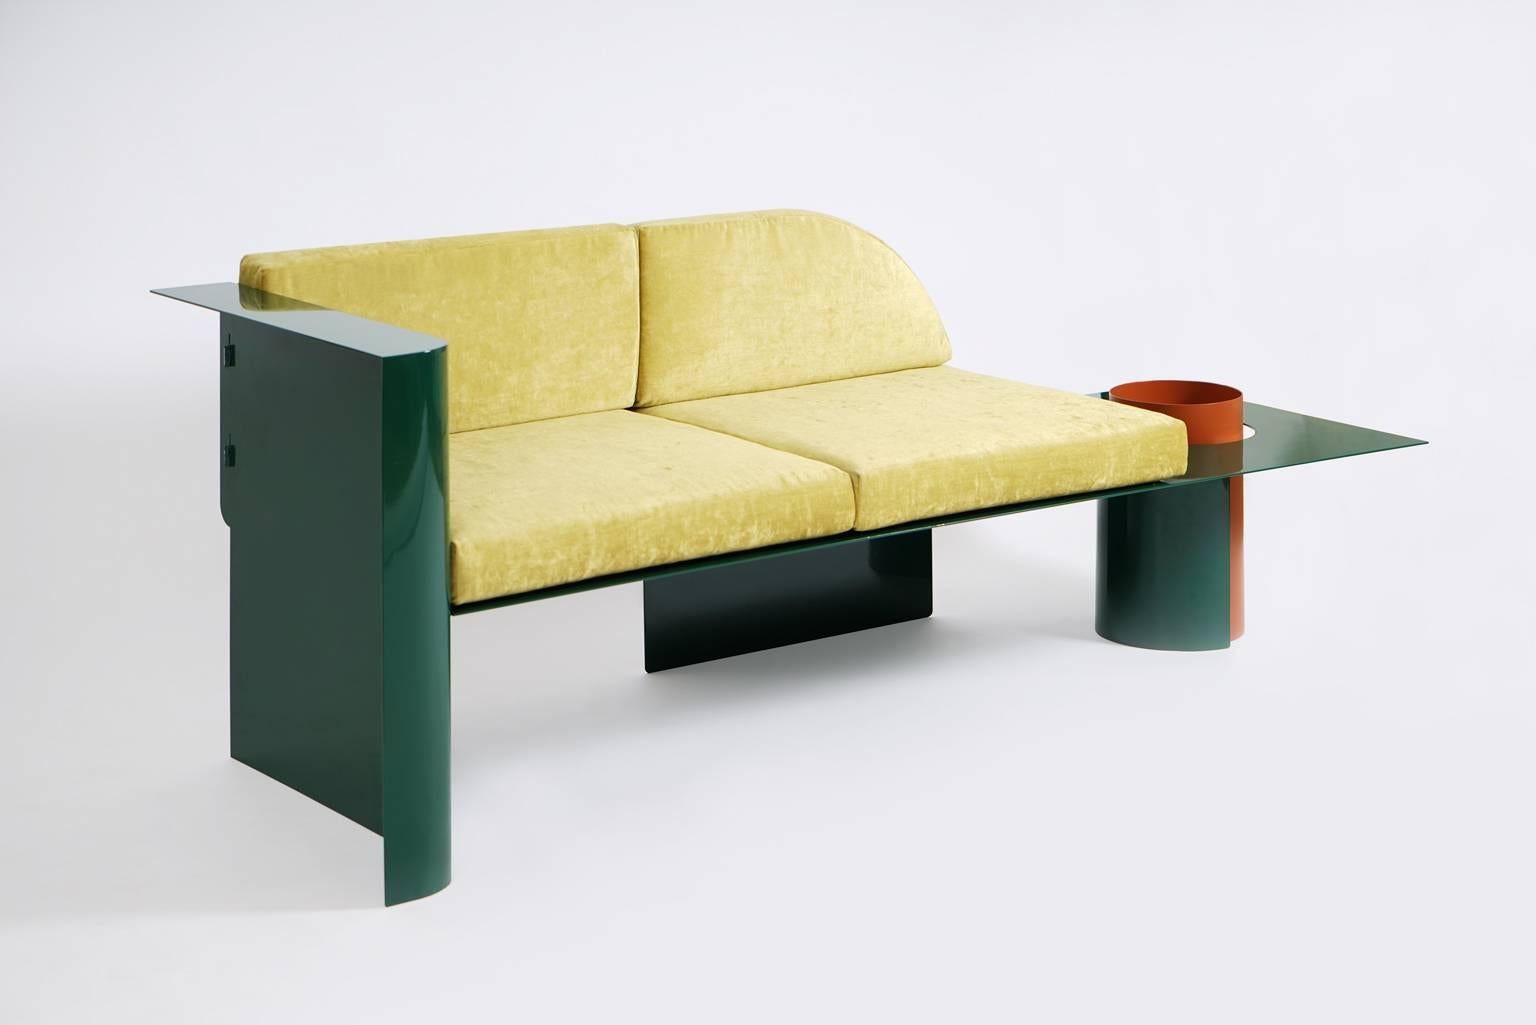 European Modern Sofa in Powder-Coated Steel with Planter Side Table 